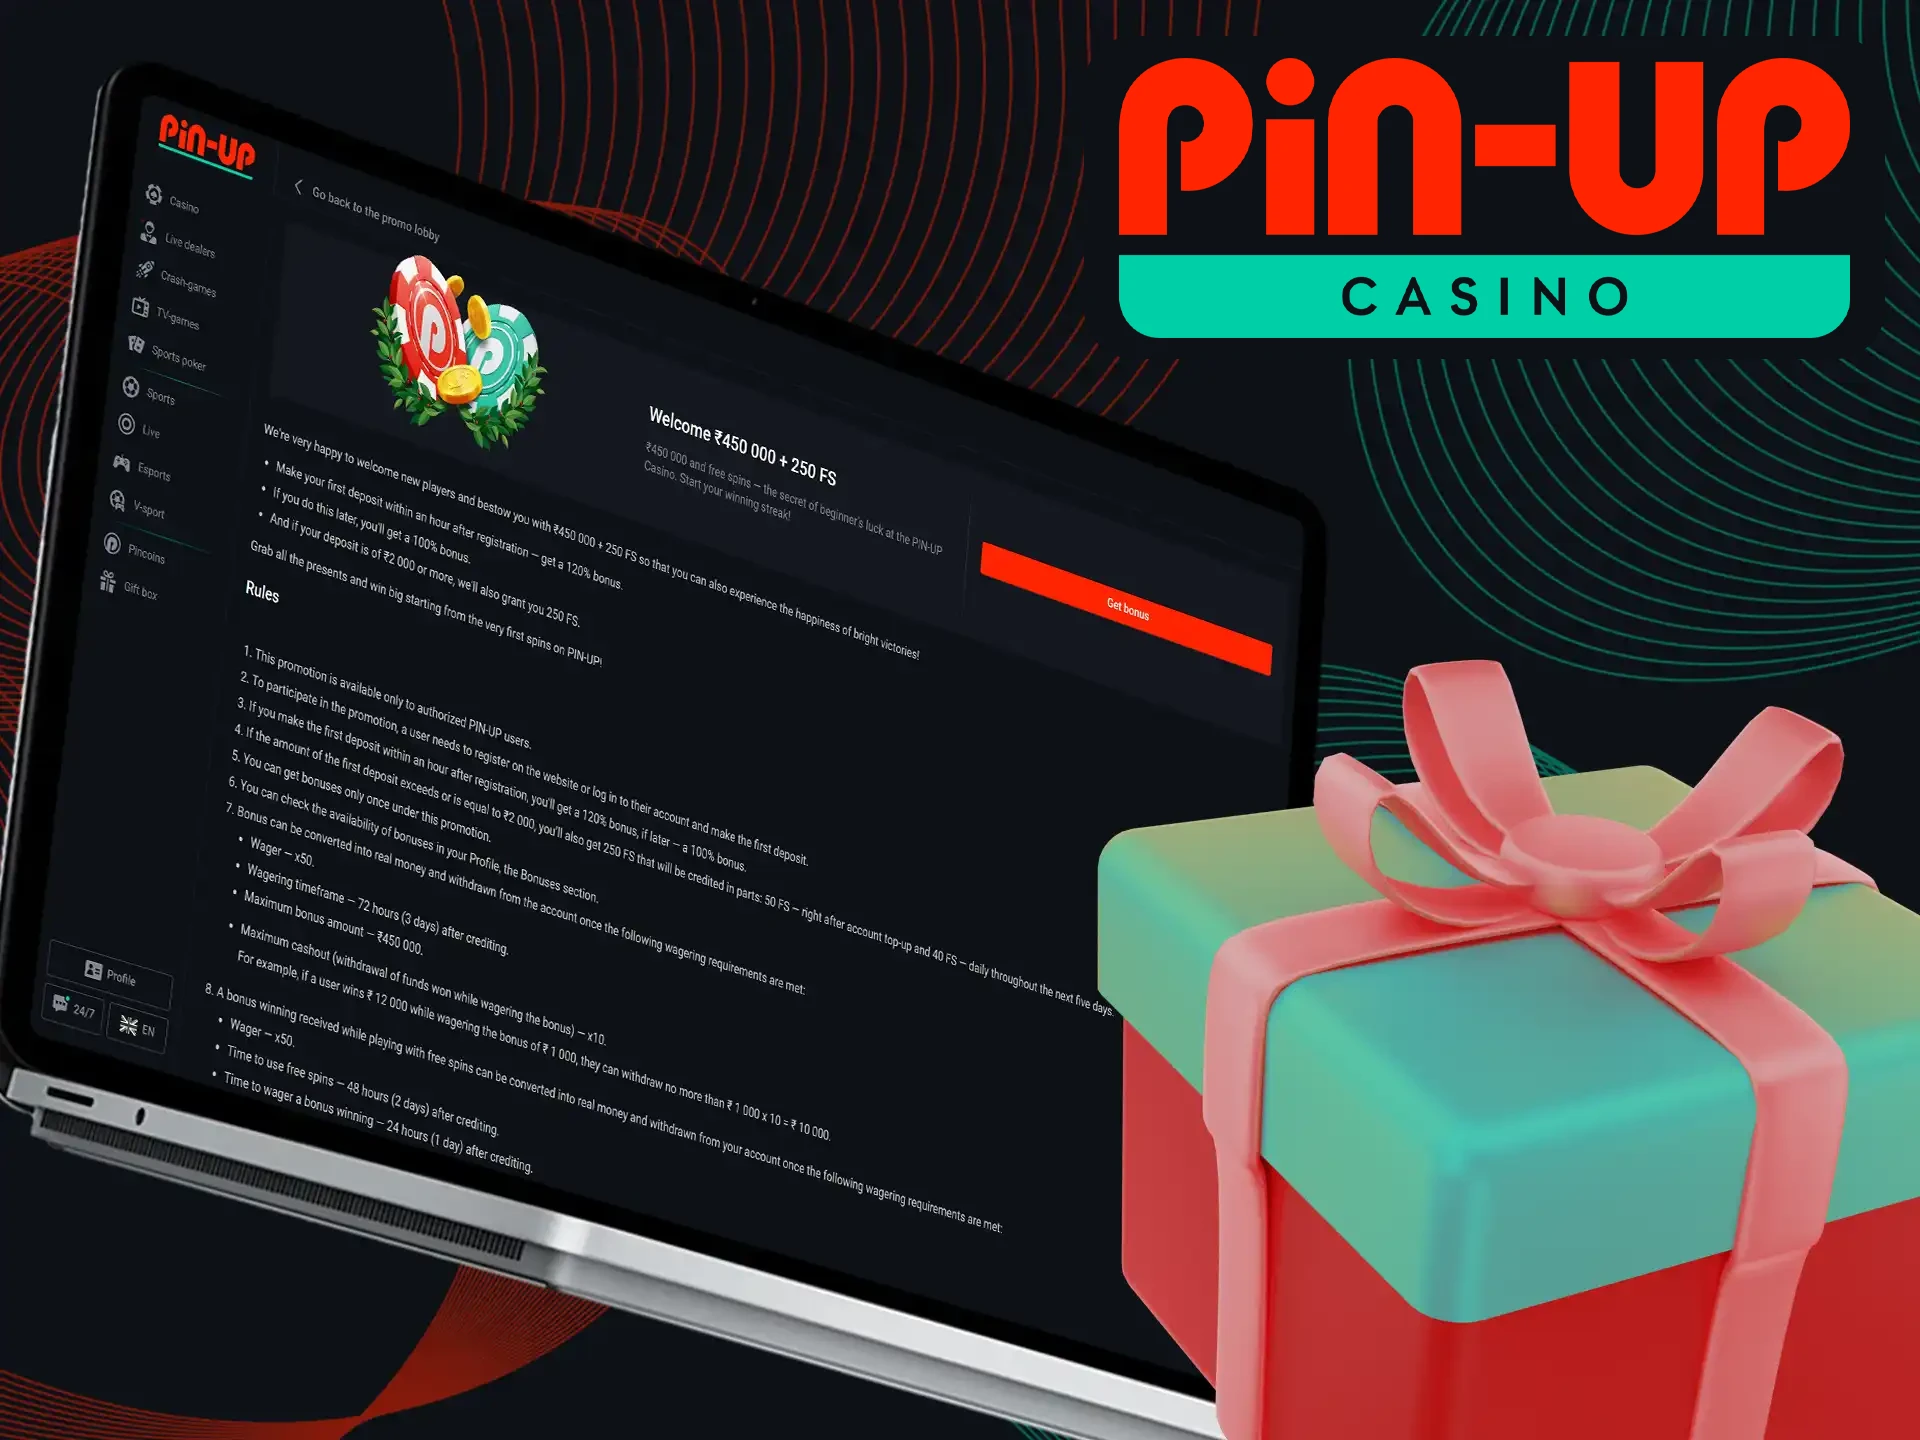 At Pin-Up Casino, we offer a welcome bonus to enhance your gaming experience!